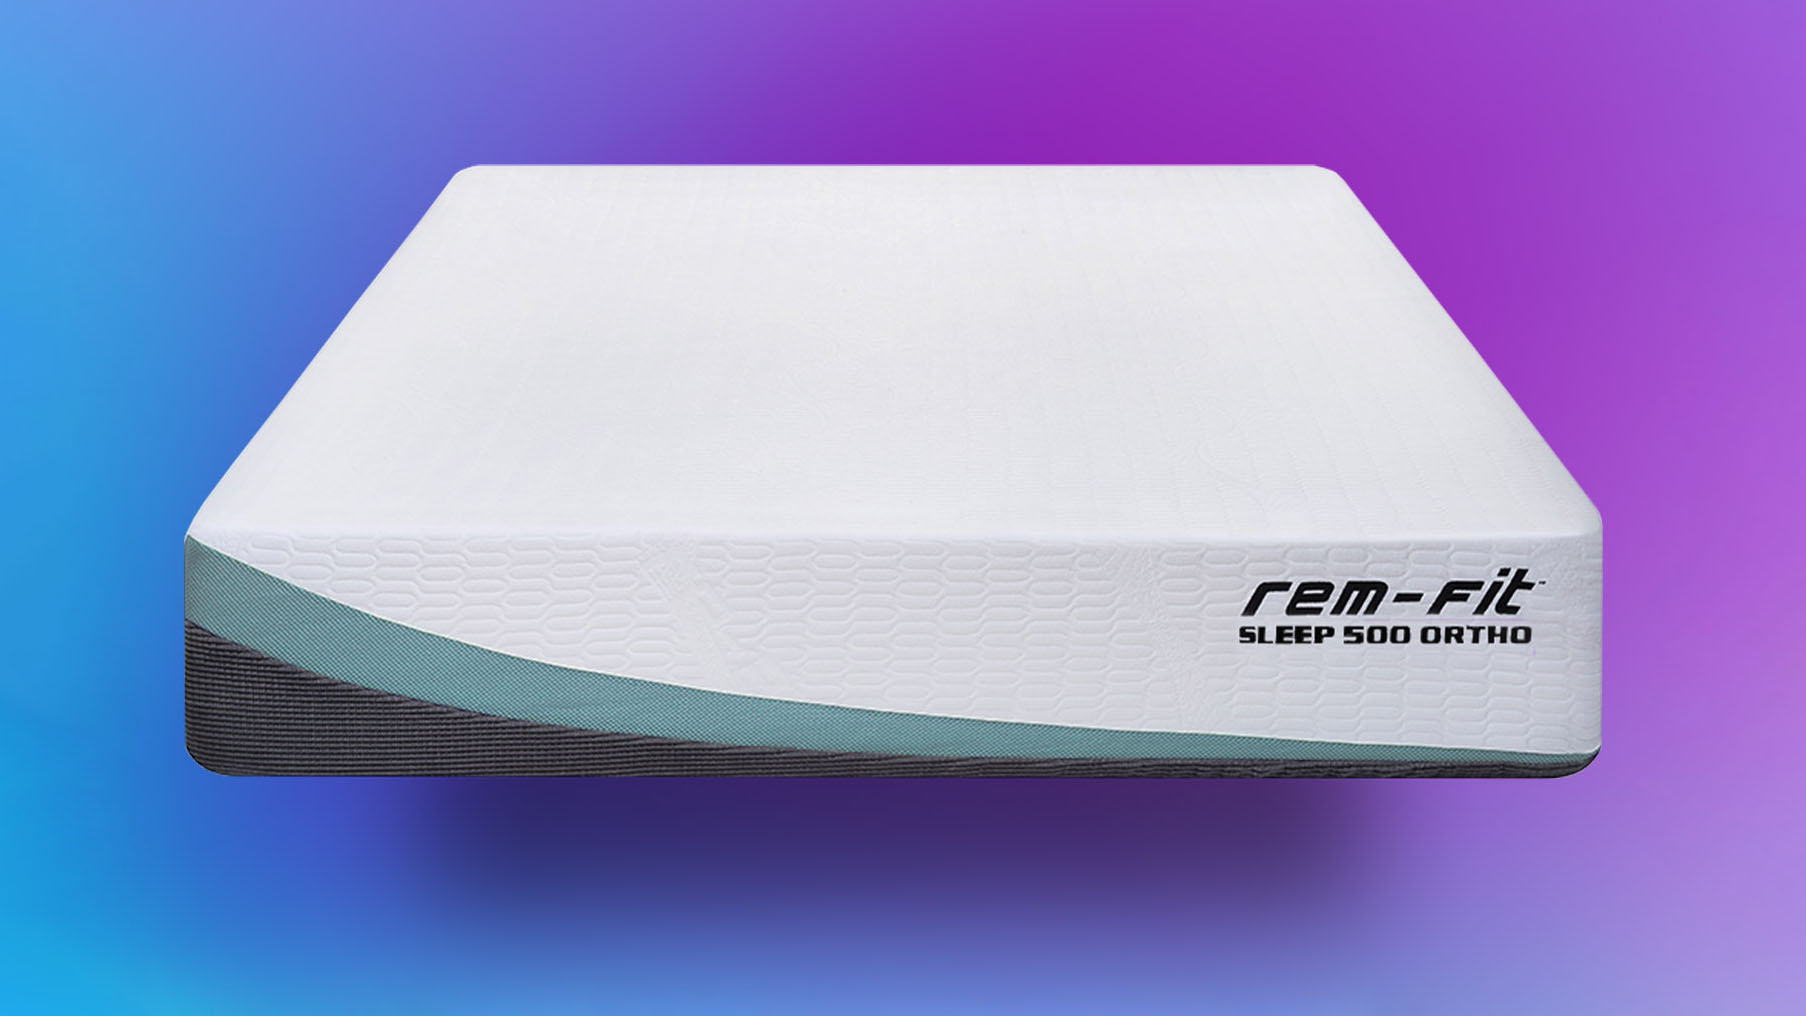 REM-Fit 500 Ortho Hybrid Mattress review: say goodbye to joint pain